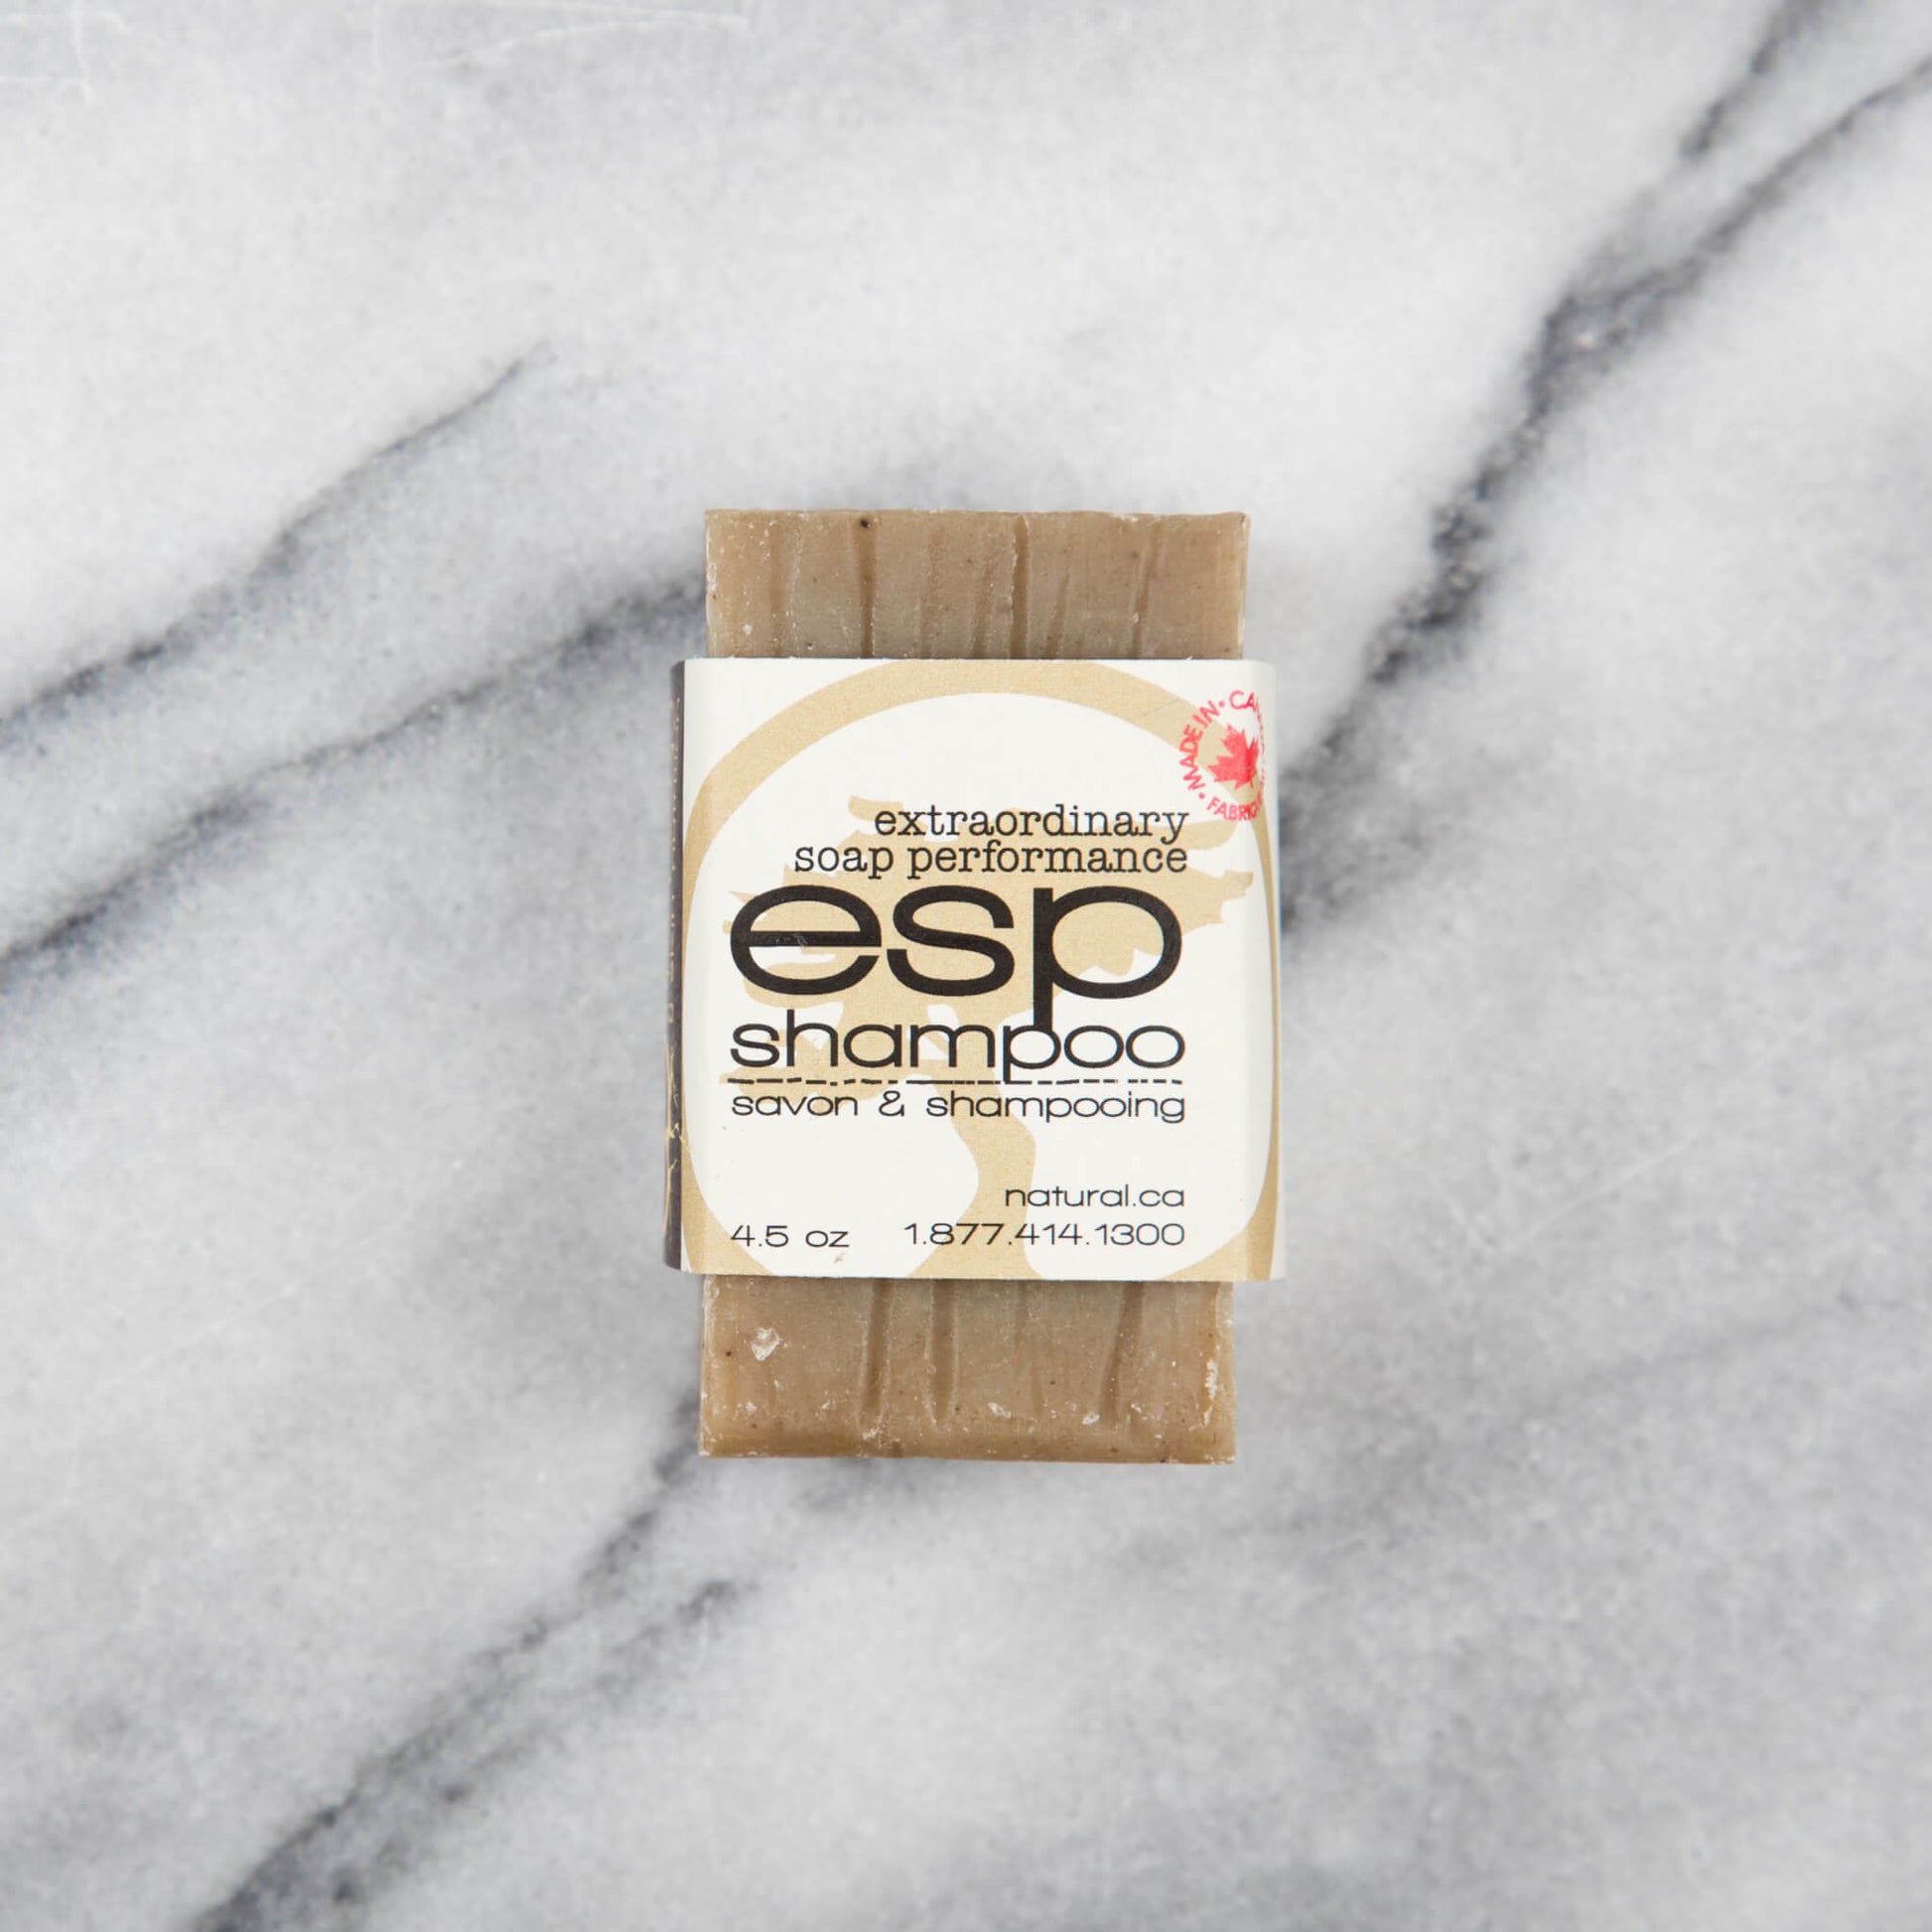 Earth to Body eco-friendly shampoo bar on marble counter